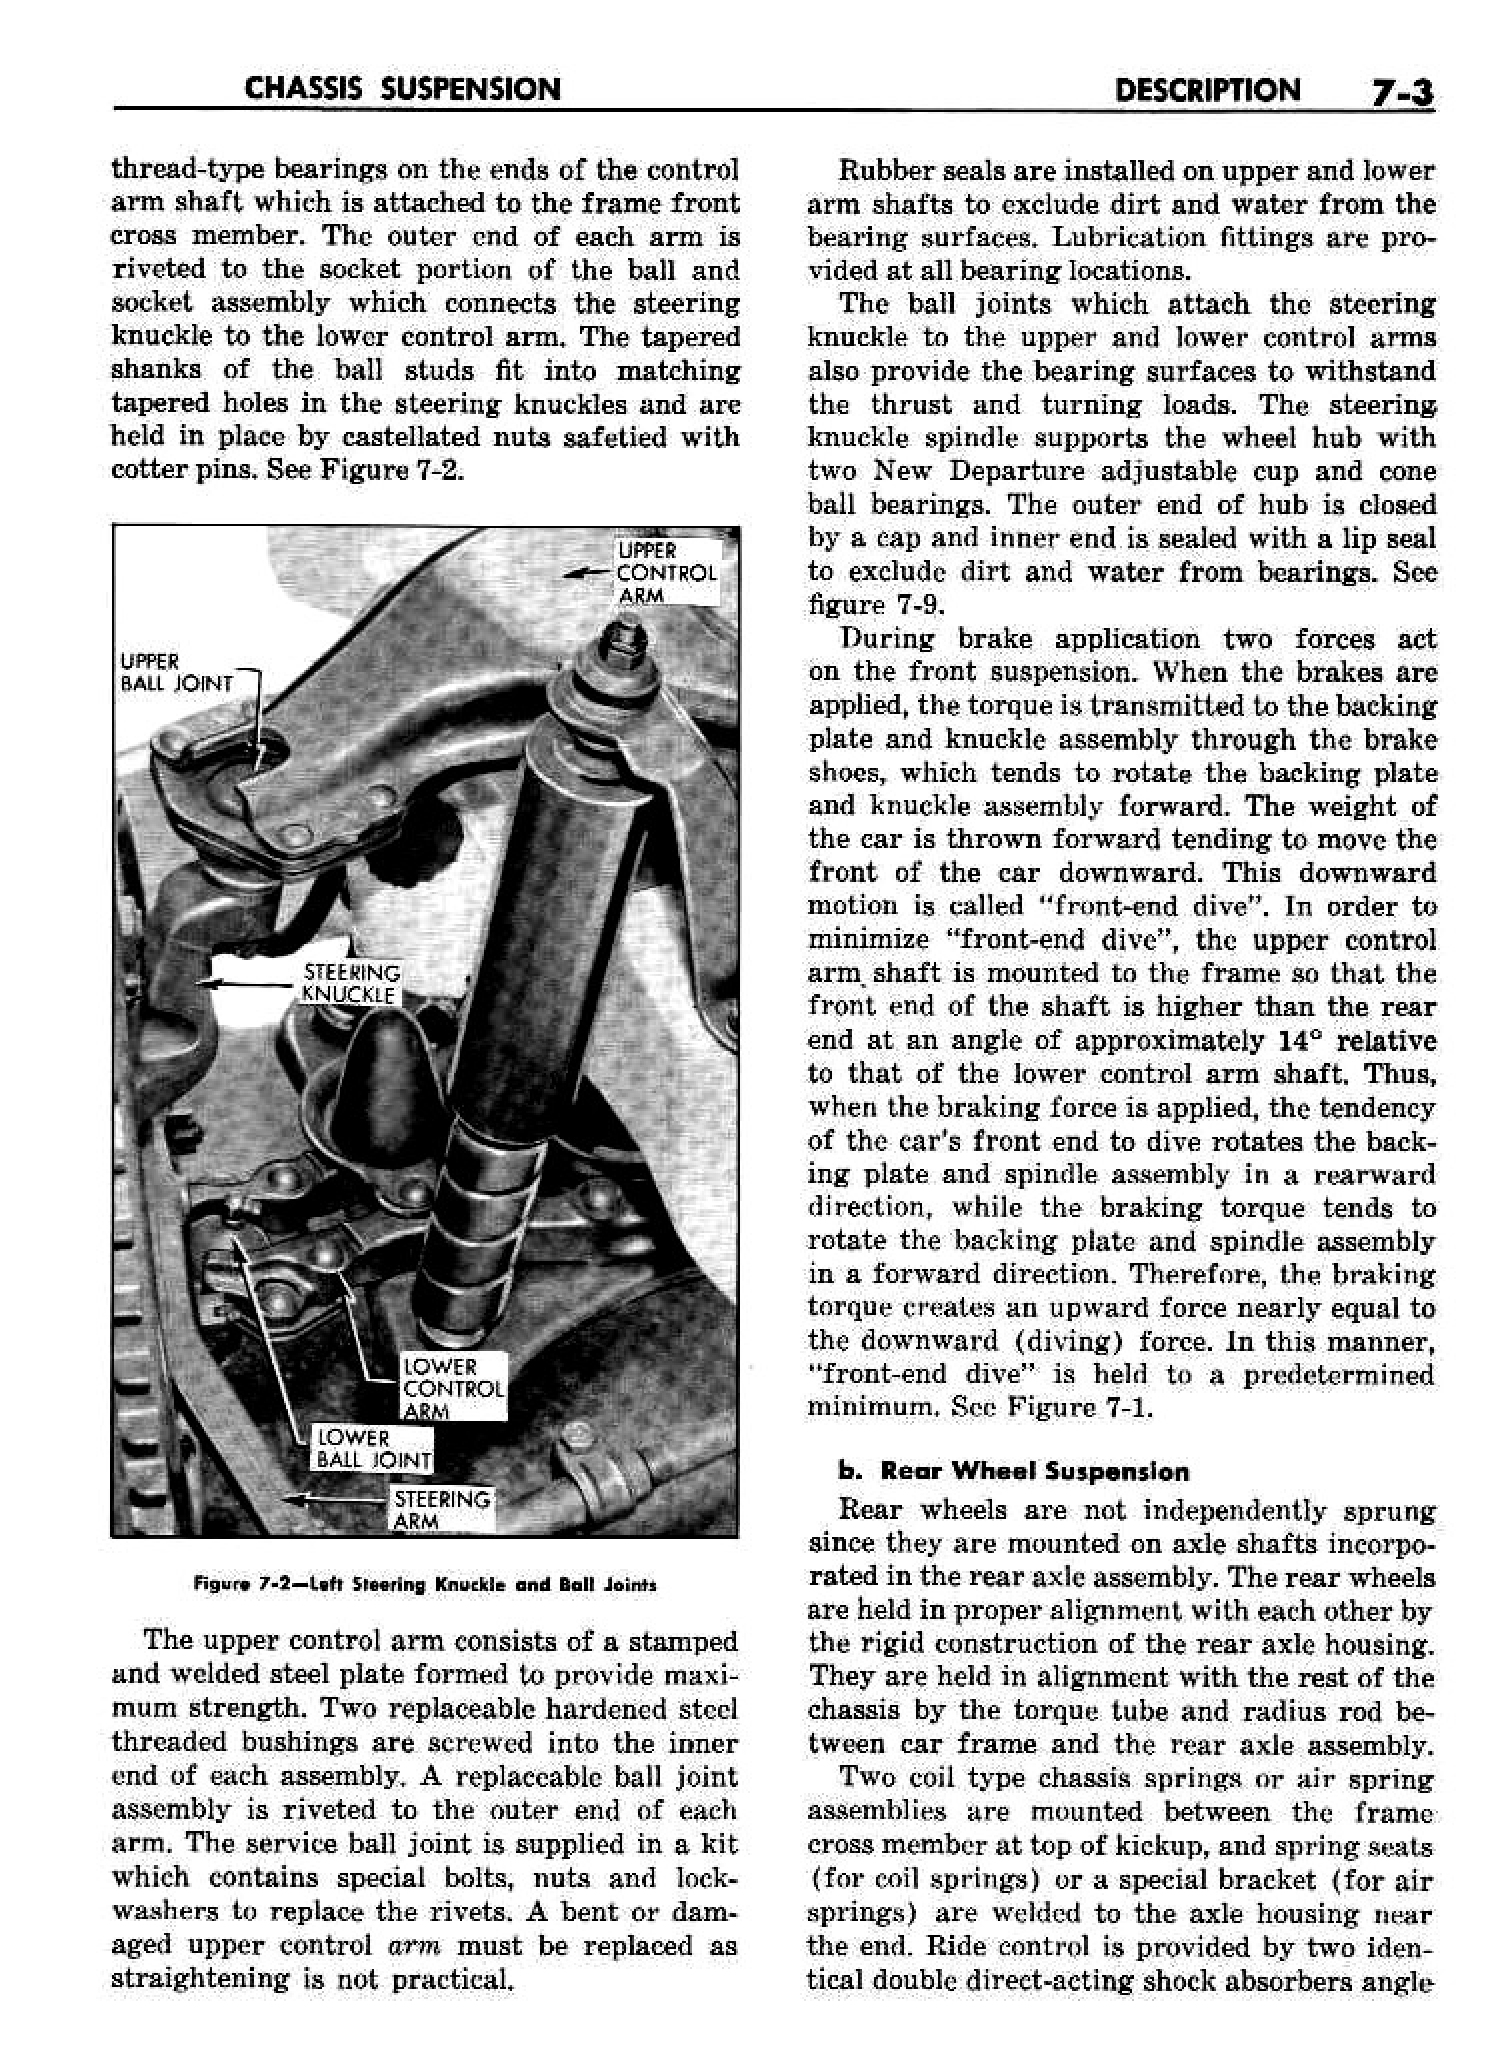 n_08 1958 Buick Shop Manual - Chassis Suspension_3.jpg